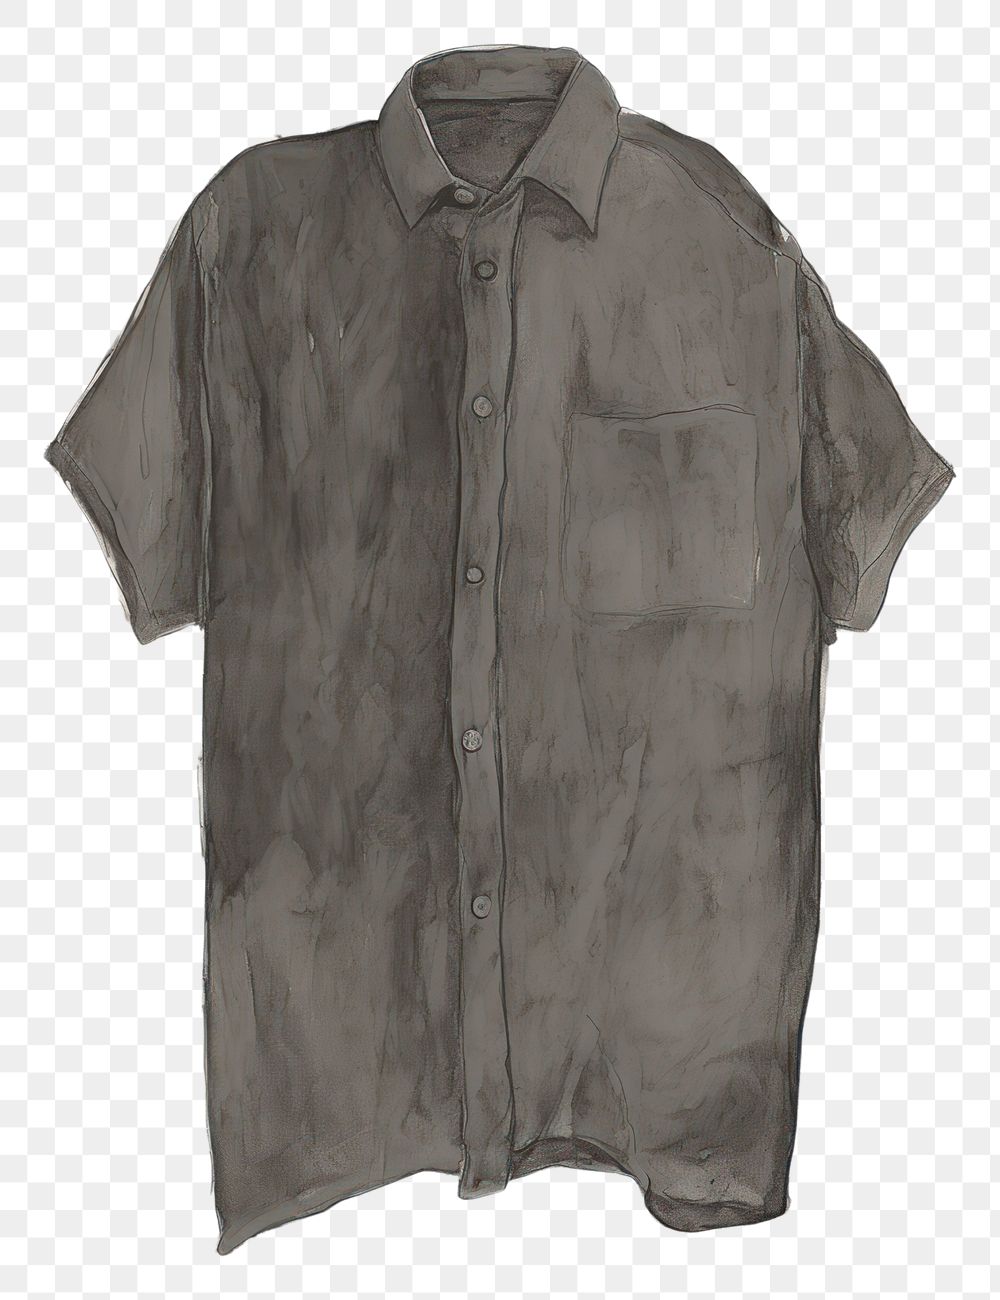 PNG Illustration of a clothes sleeve blouse shirt.